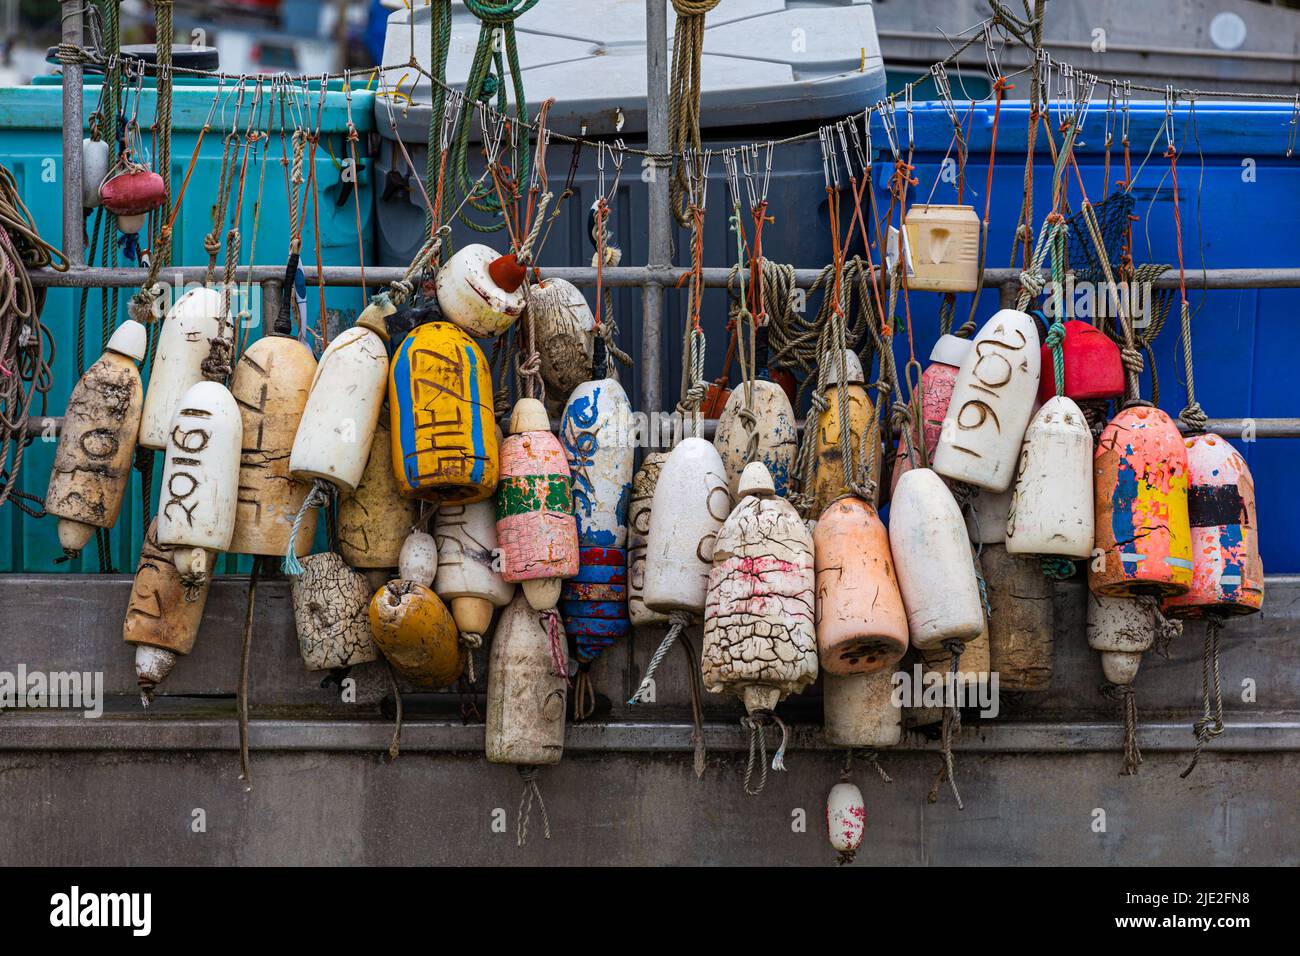 An array of crab pot floats on the side of a commercial fishing vessel in Steveston British Columbia Canada Stock Photo